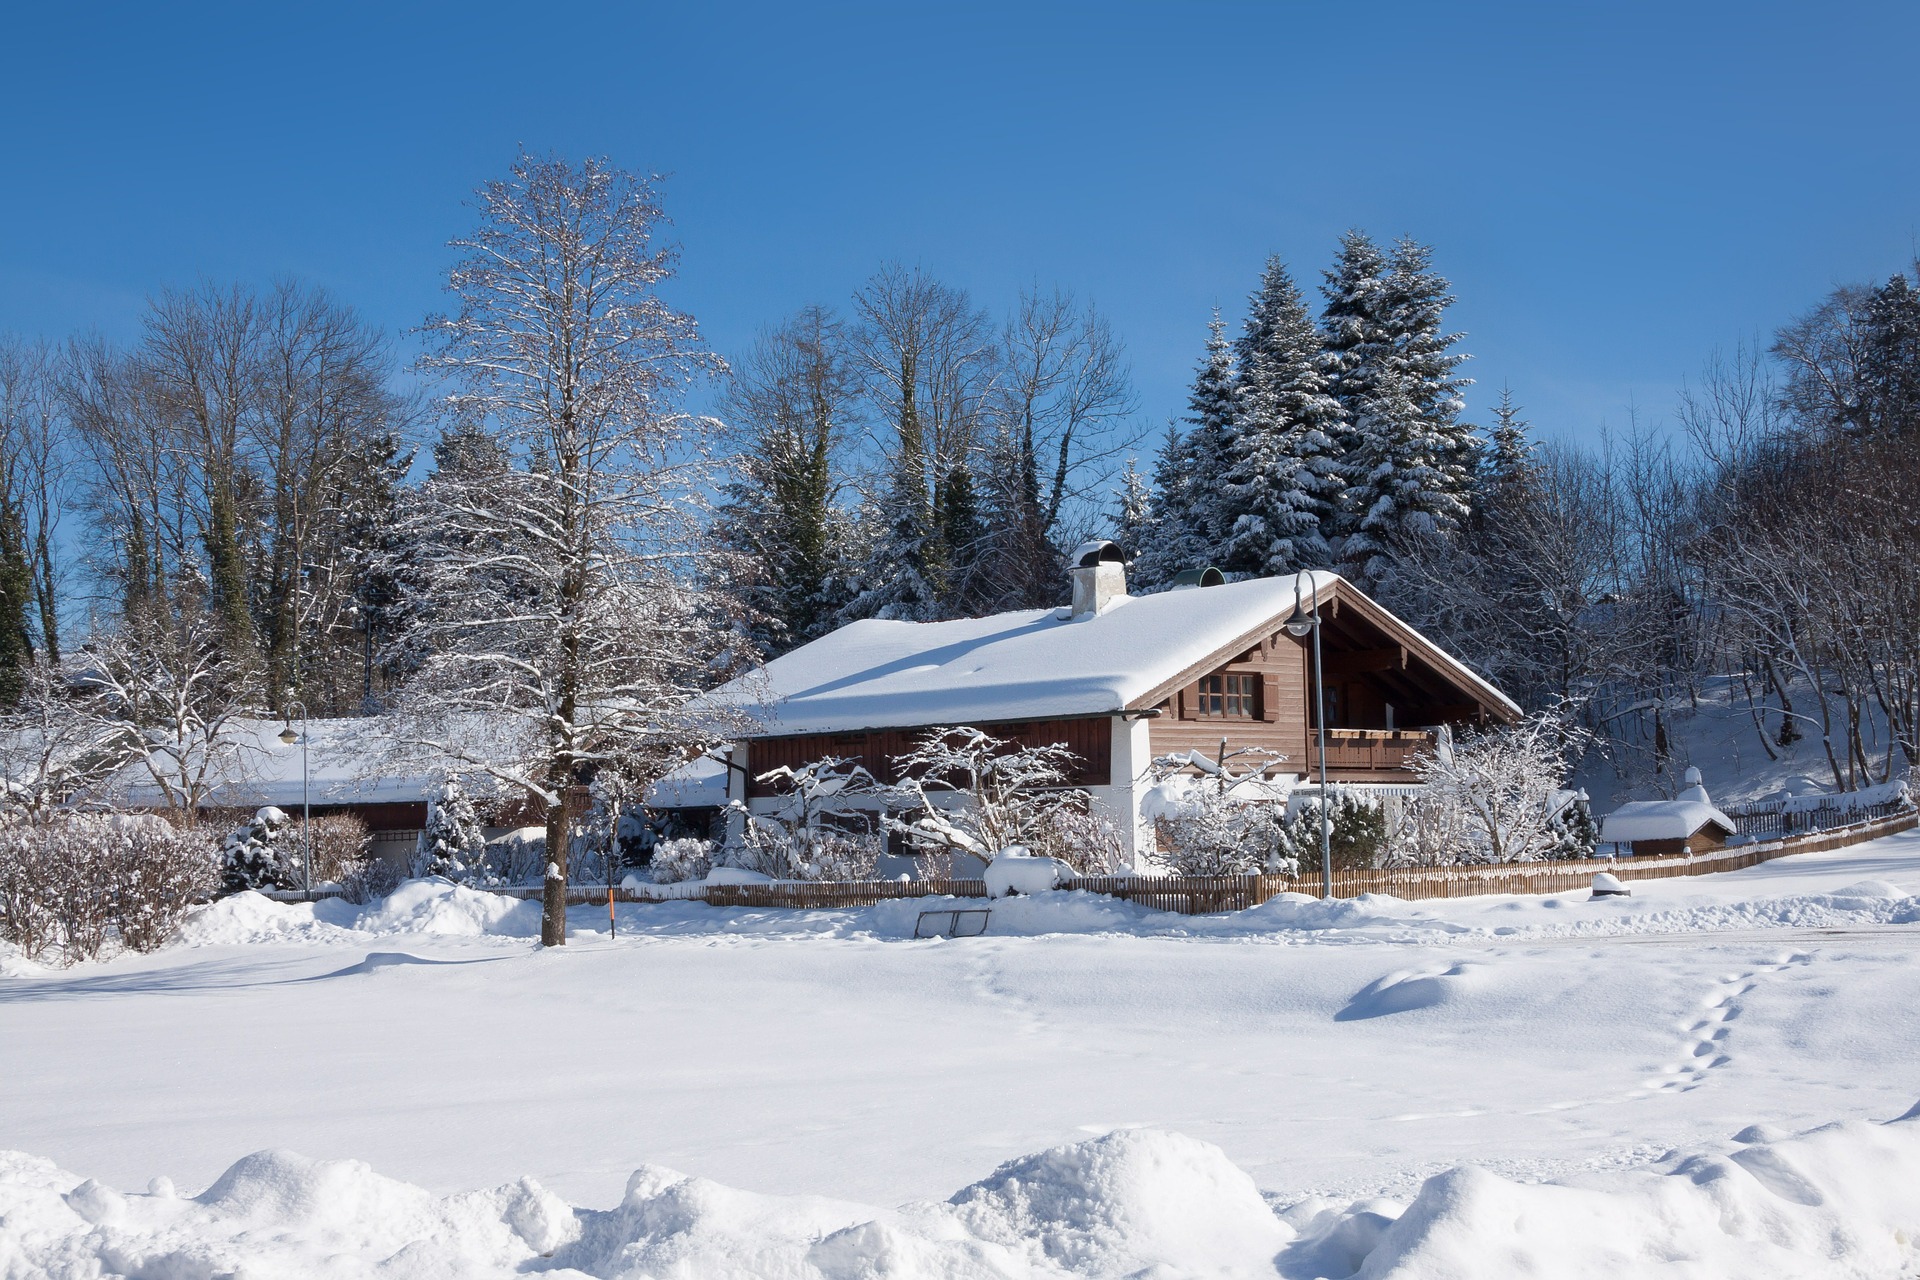 Four Things Every New Homeowner Should Know About the Winter